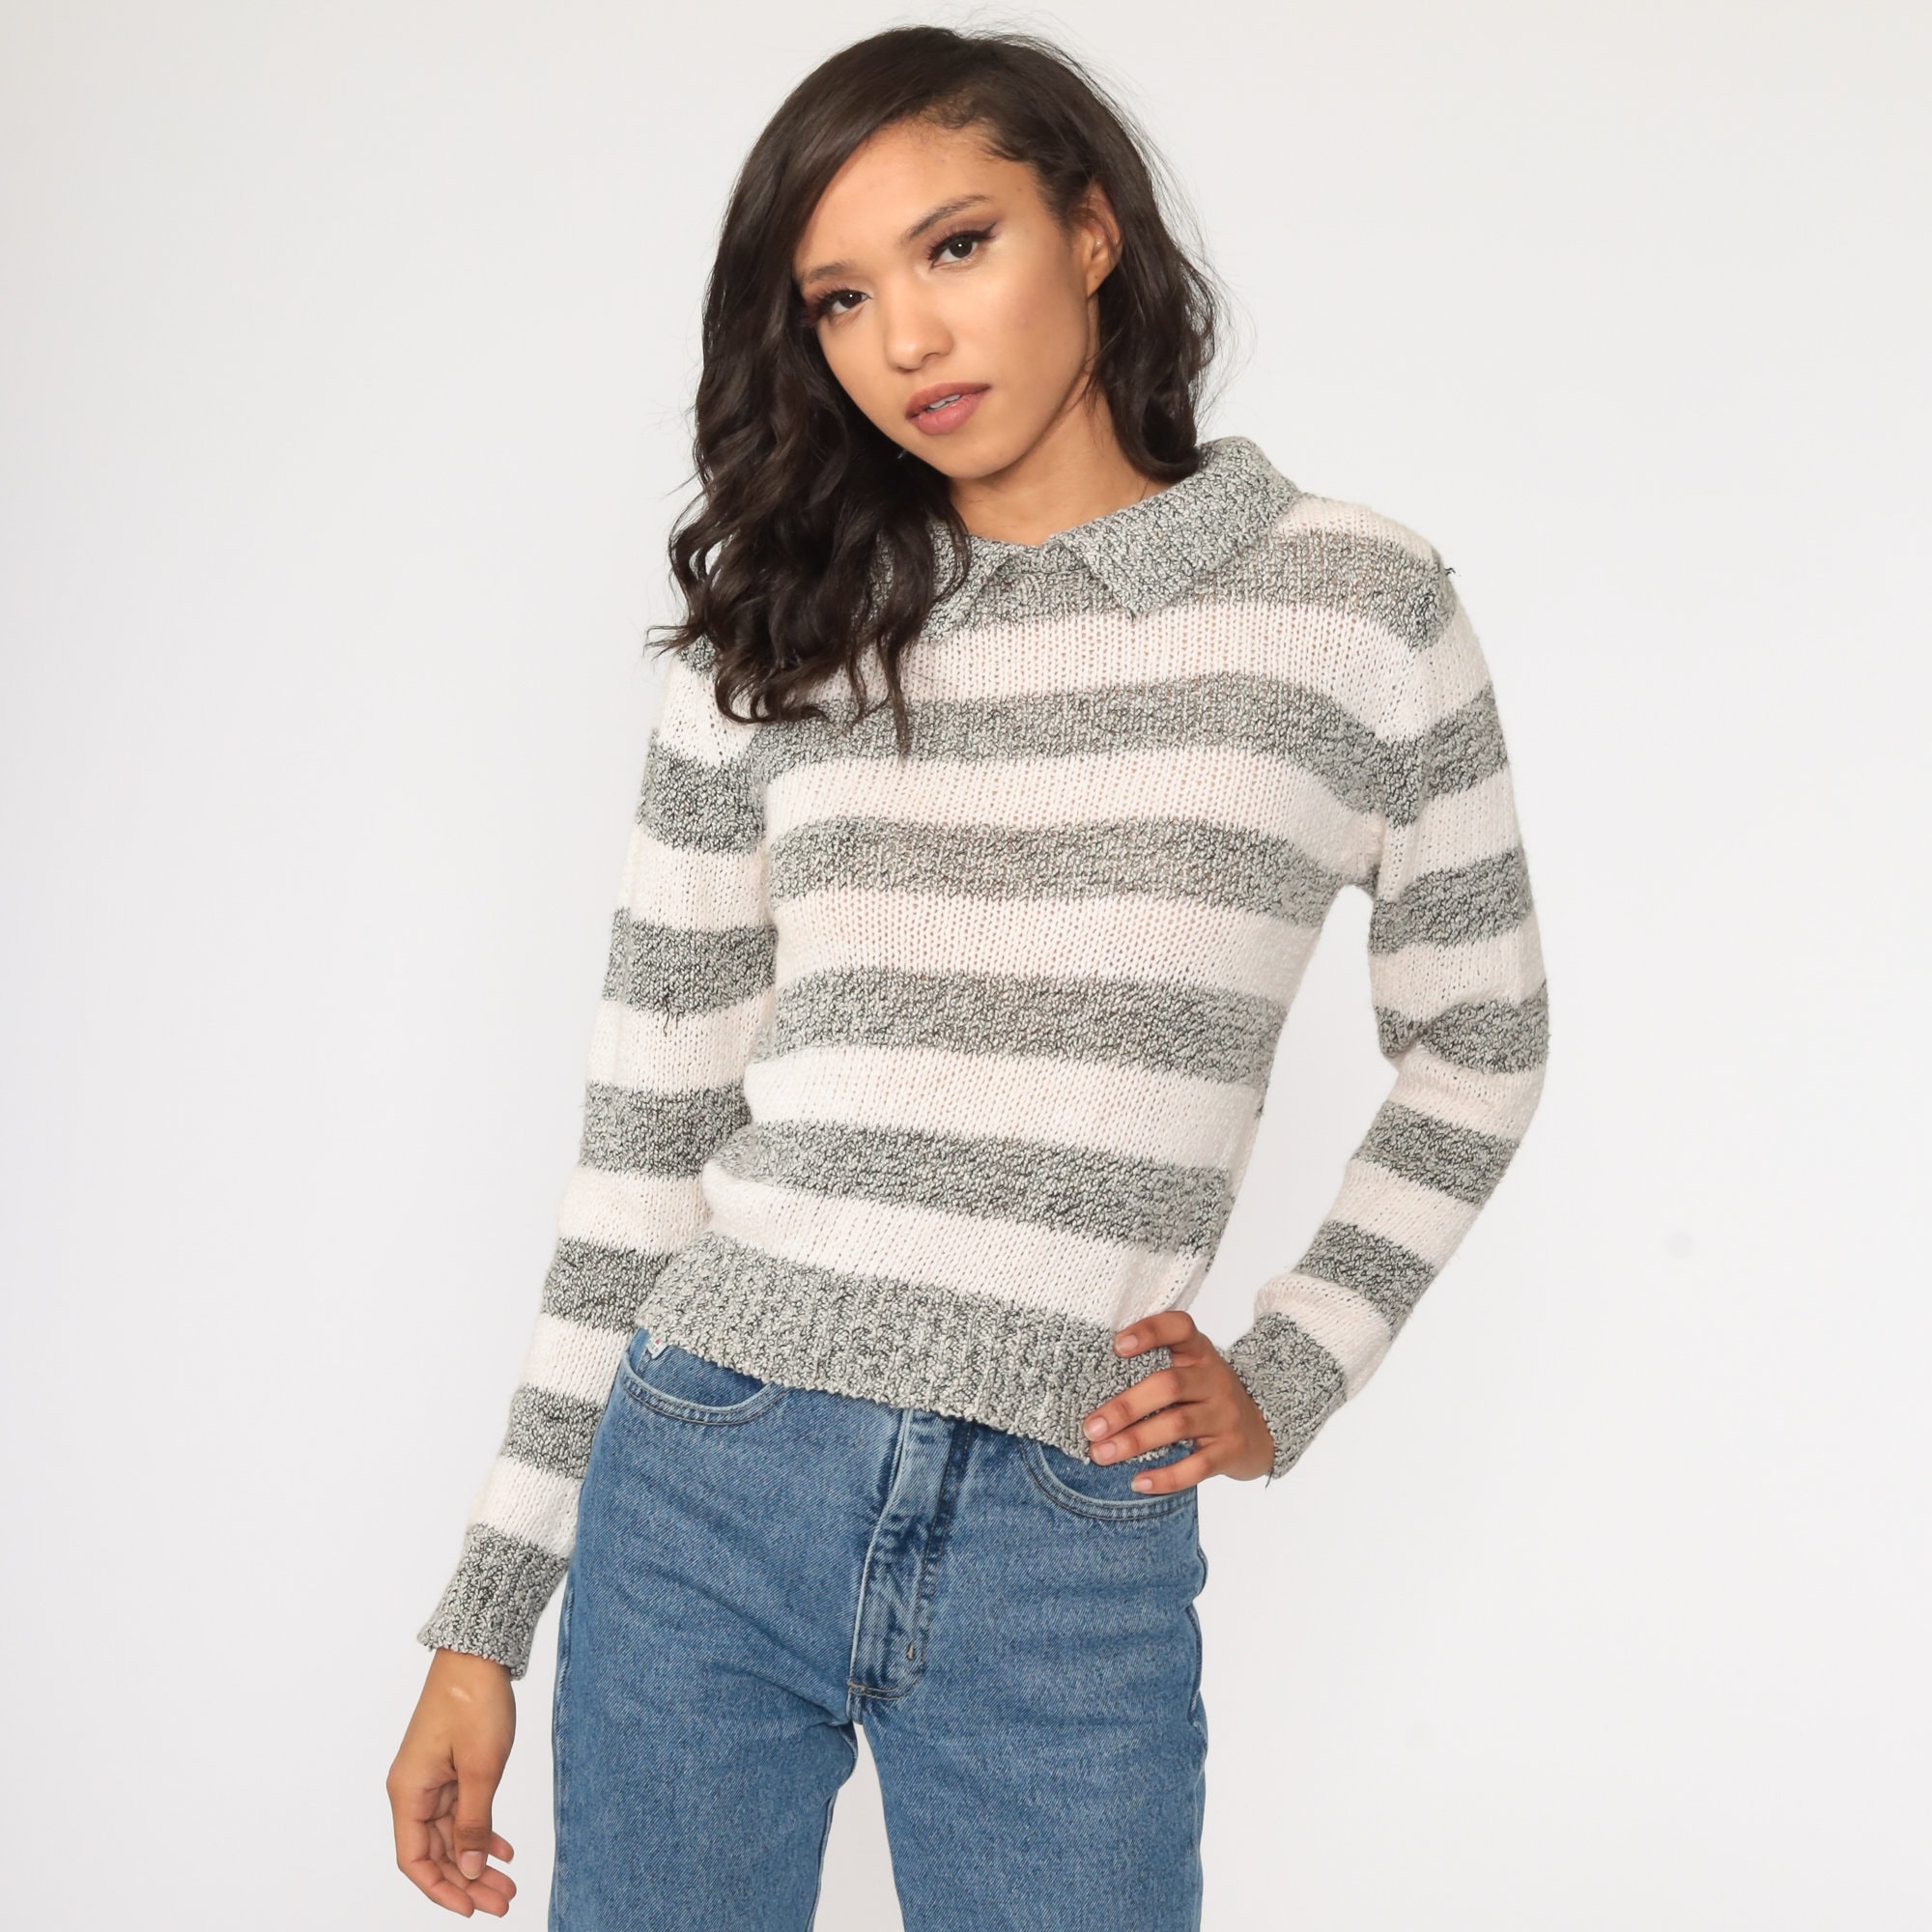 Grey Striped Sweater Collared Off-White Knit 80s Pullover Bohemian ...